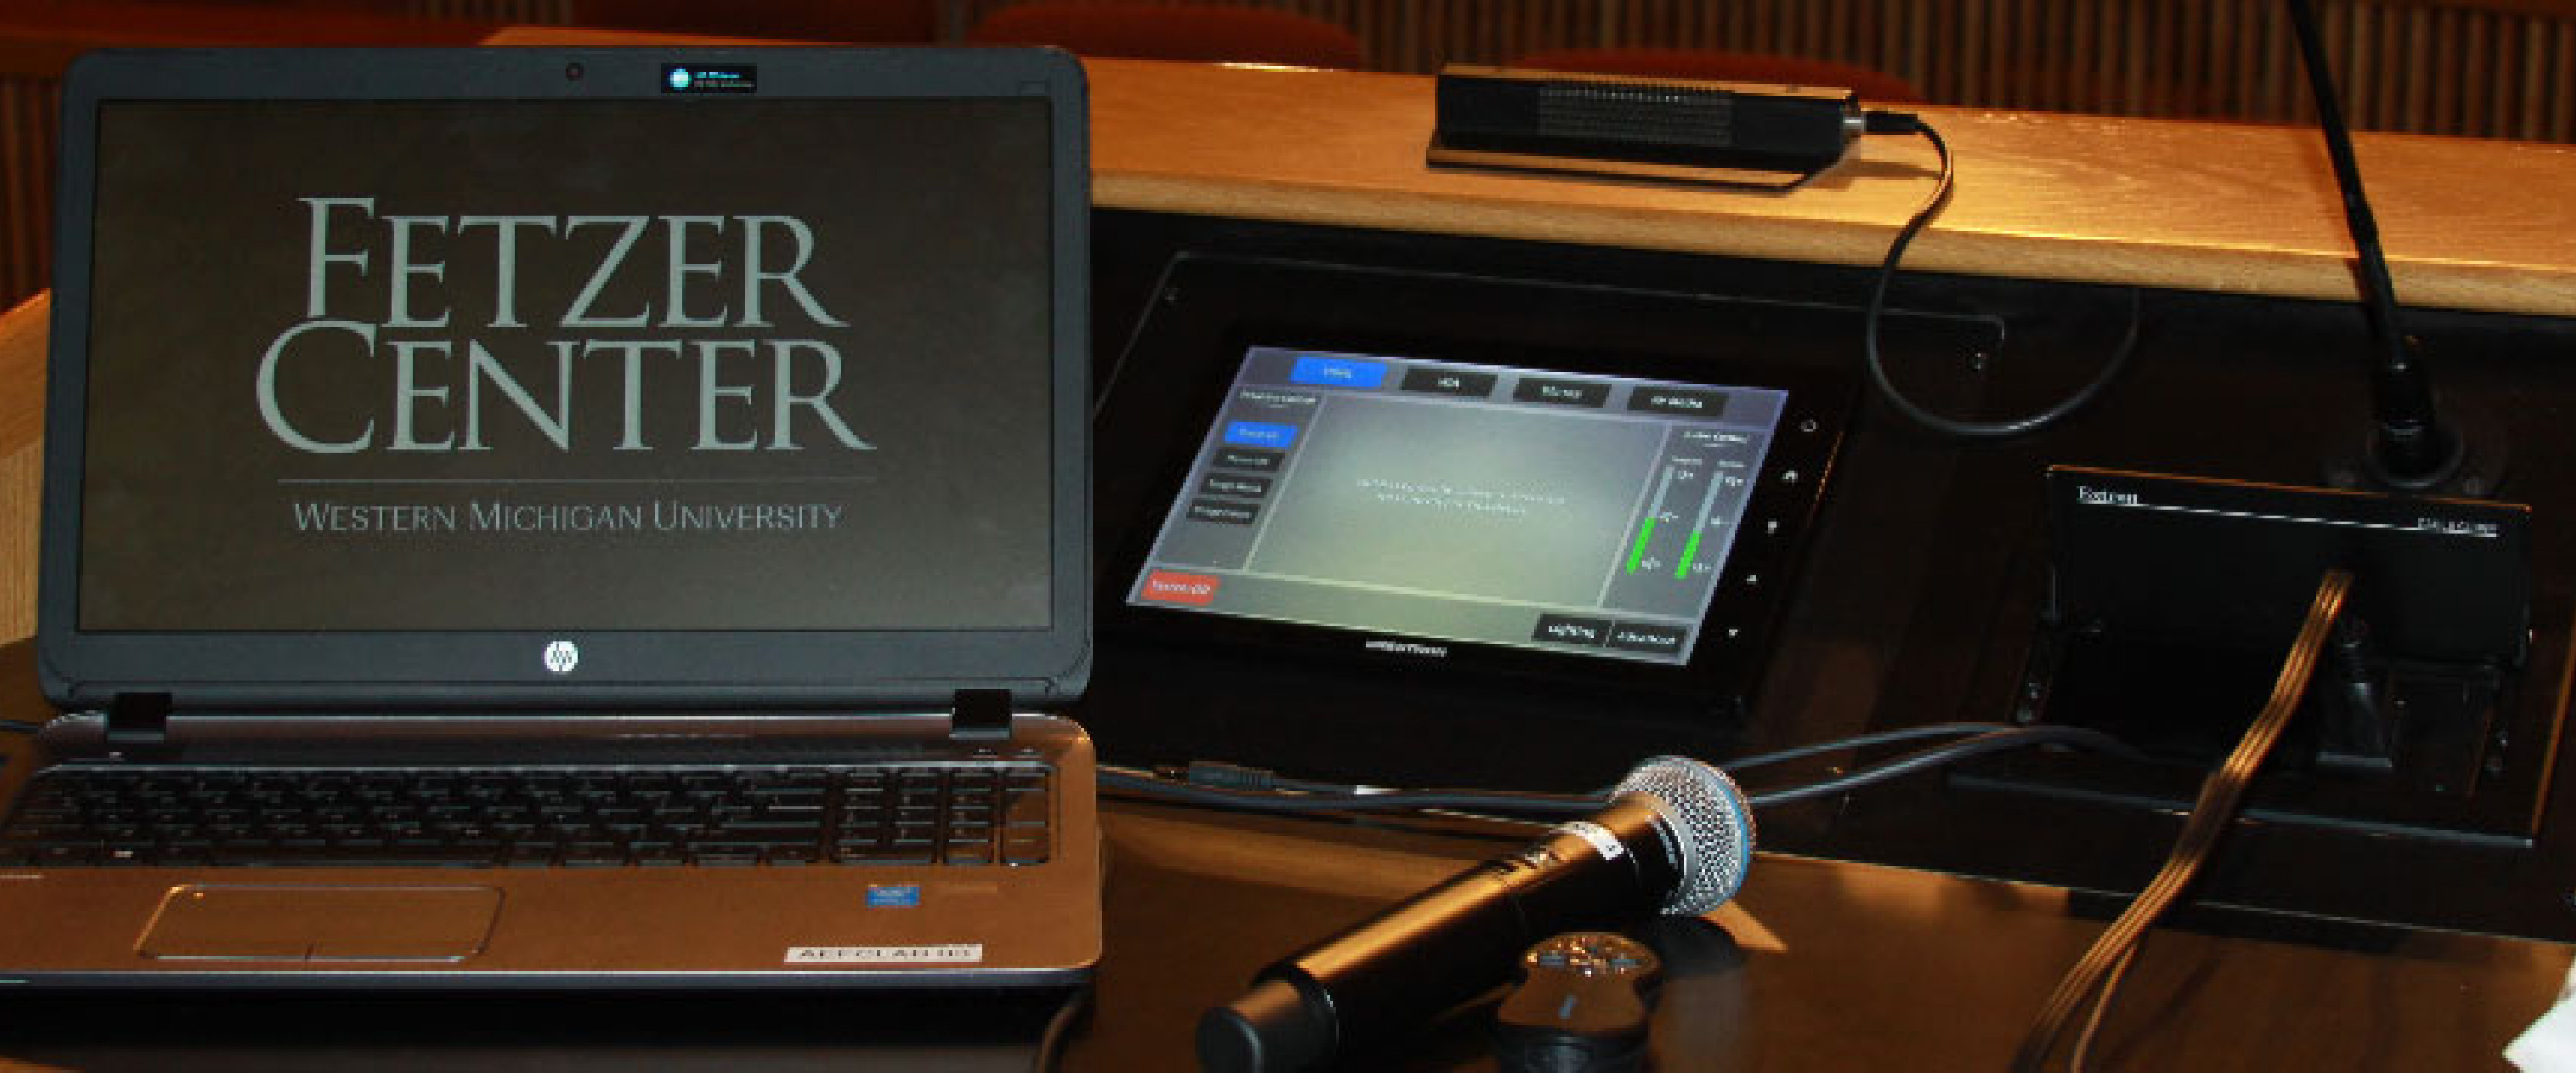 A laptop with Fetzer Center screen savor on a podium with microphone